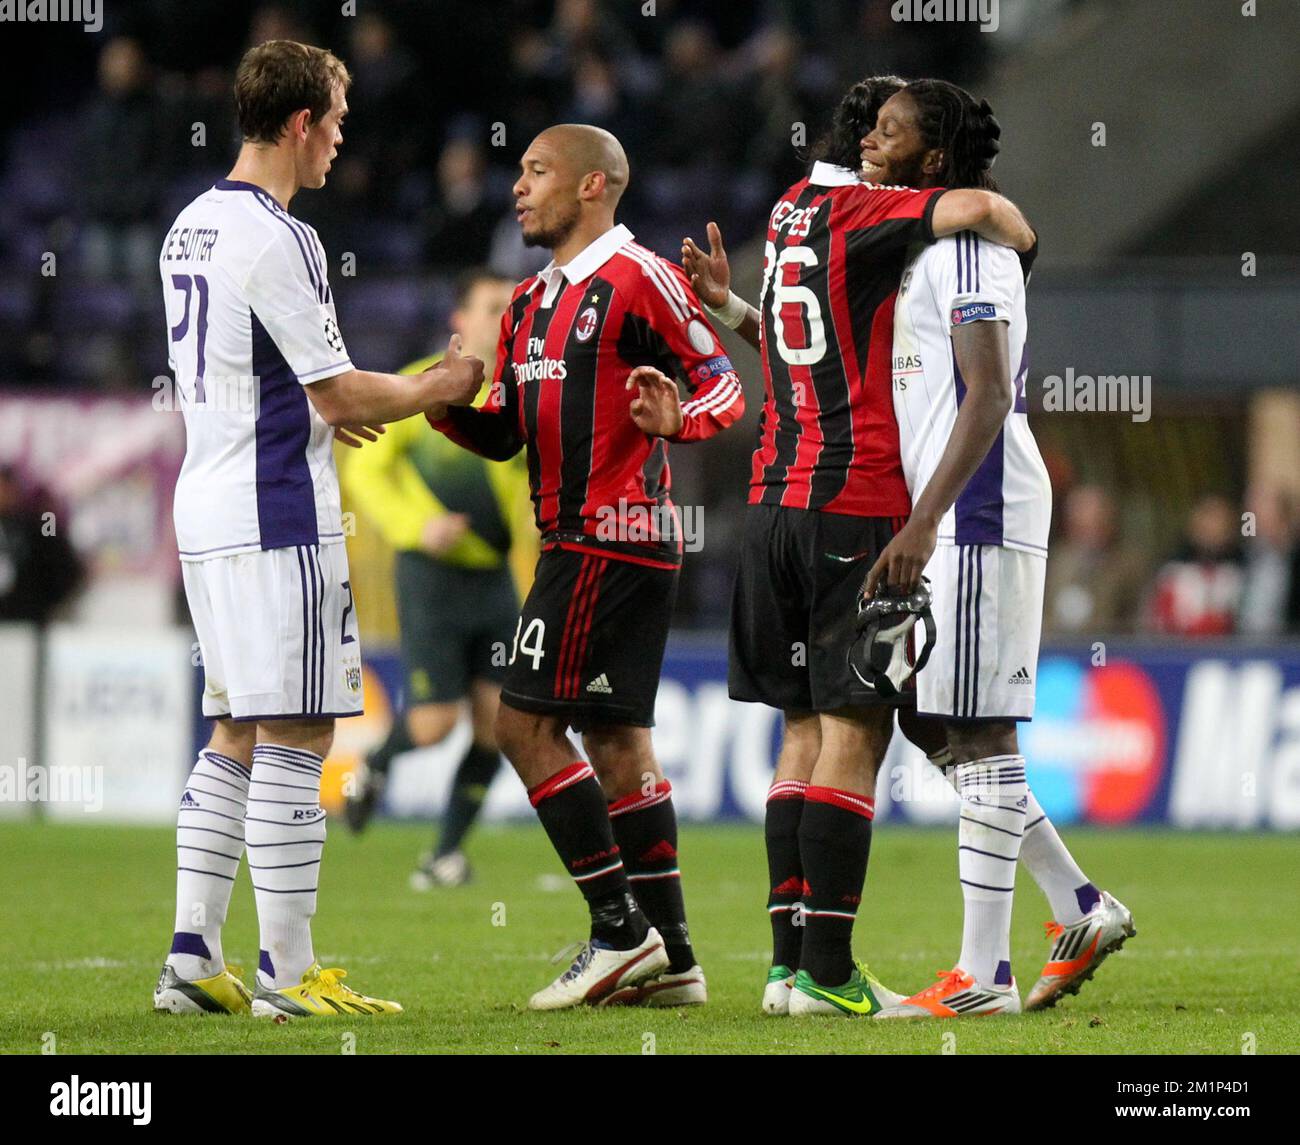 20121121 - BRUSSELS, BELGIUM: Anderlecht's Tom De Sutter, Milan's Nigel de Jong, Milan's Mario Yepes and Anderlecht's Dieumerci Mbokani pictured after the football game between Belgian RSC Anderlecht and Italian AC Milan, on the fifth day of the group C of Champions League group C Wednesday 21 November 2012 in Brussels.  BELGA PHOTO VIRGINIE LEFOUR Stock Photo